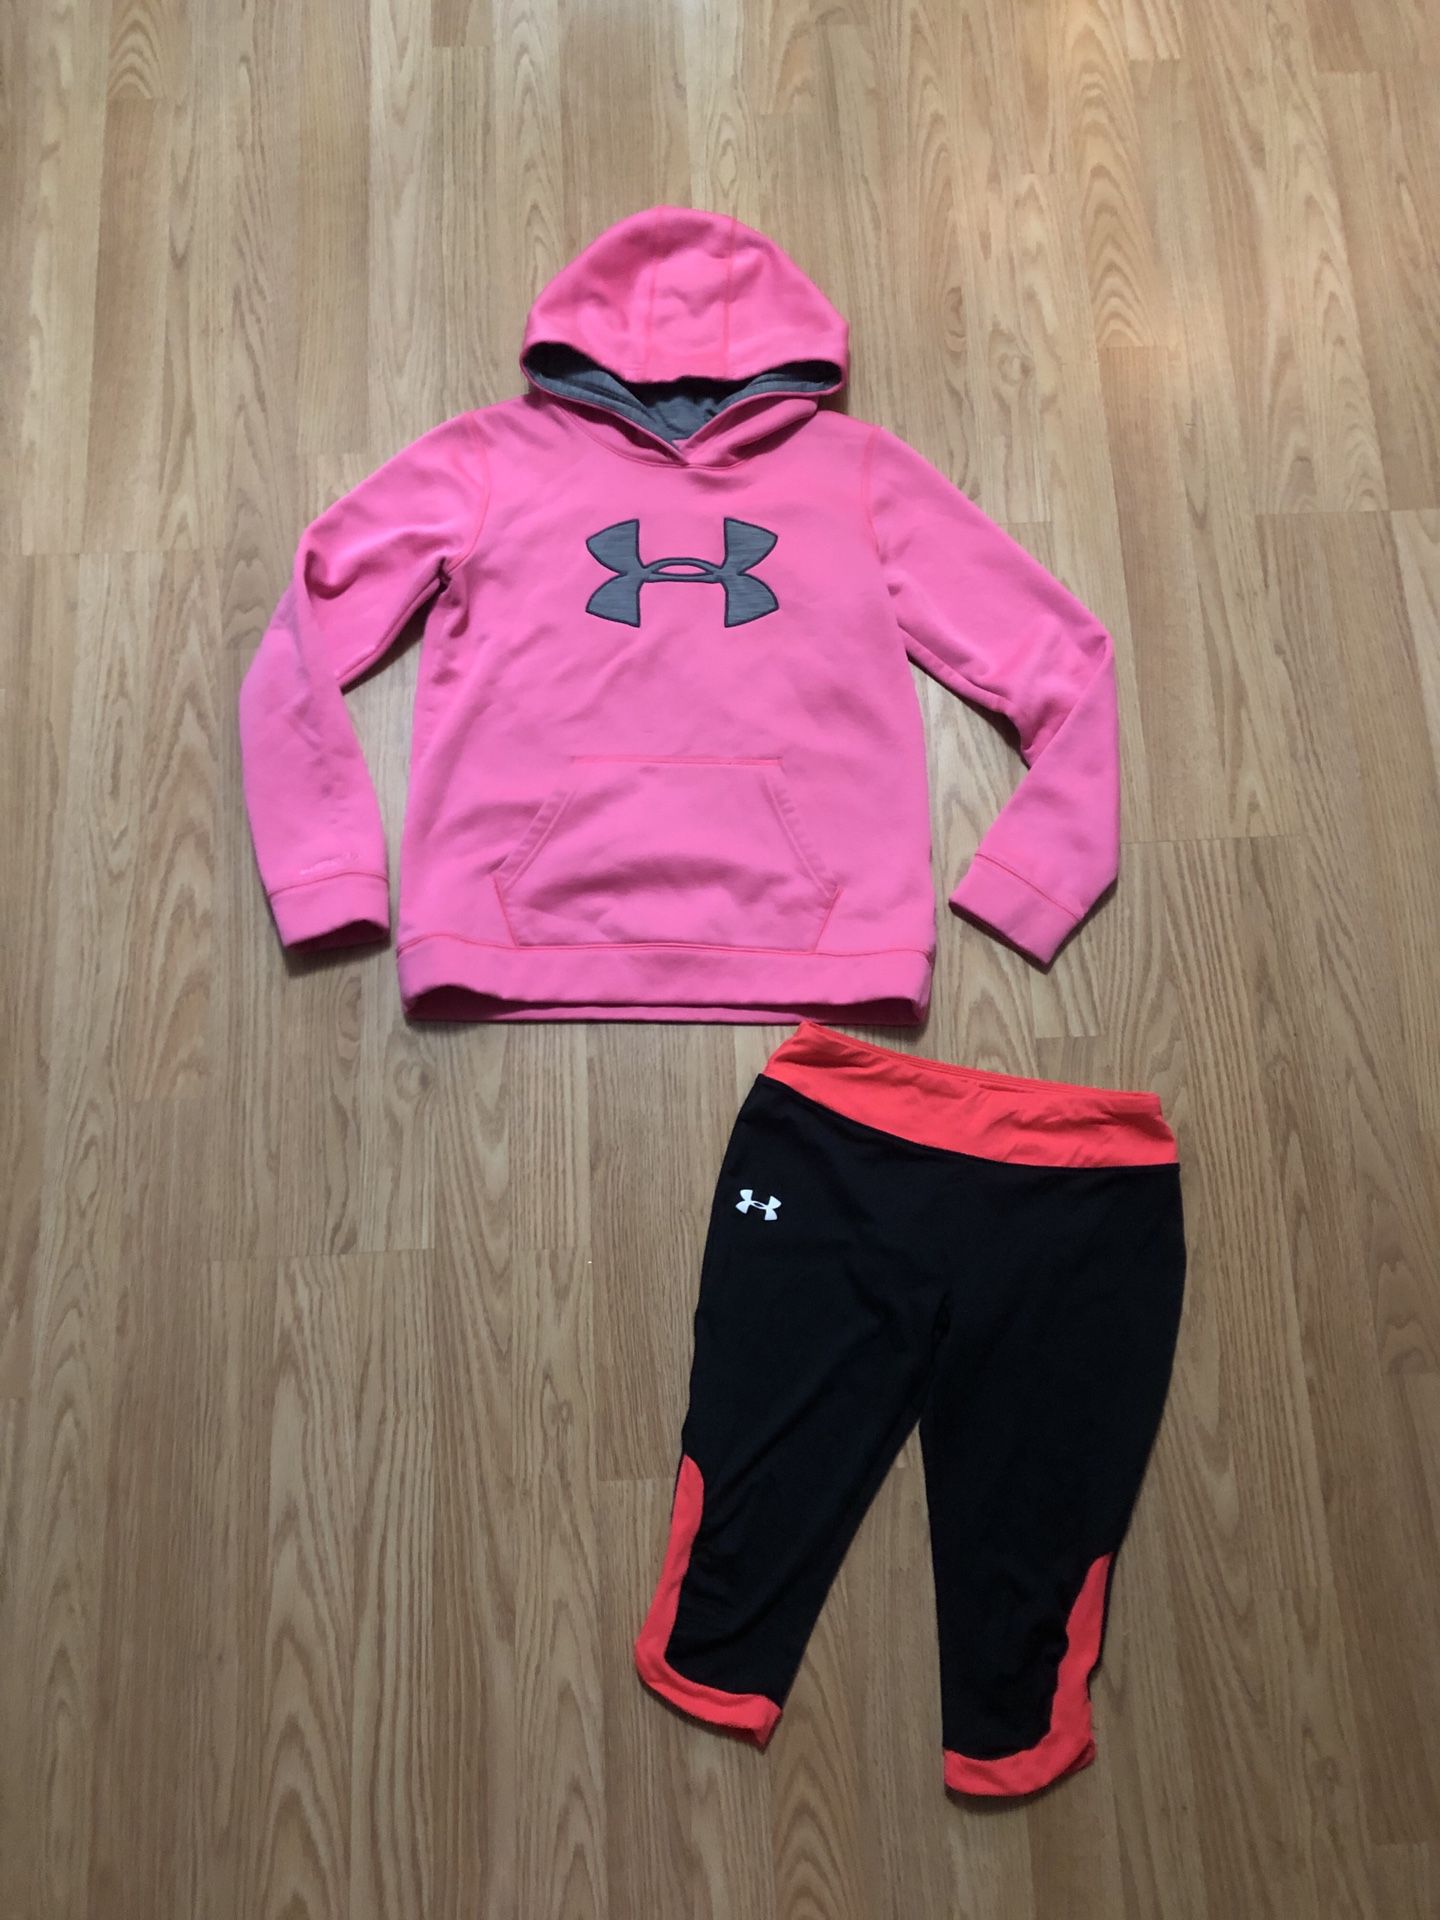 Girls Youth Large Under Armour lot